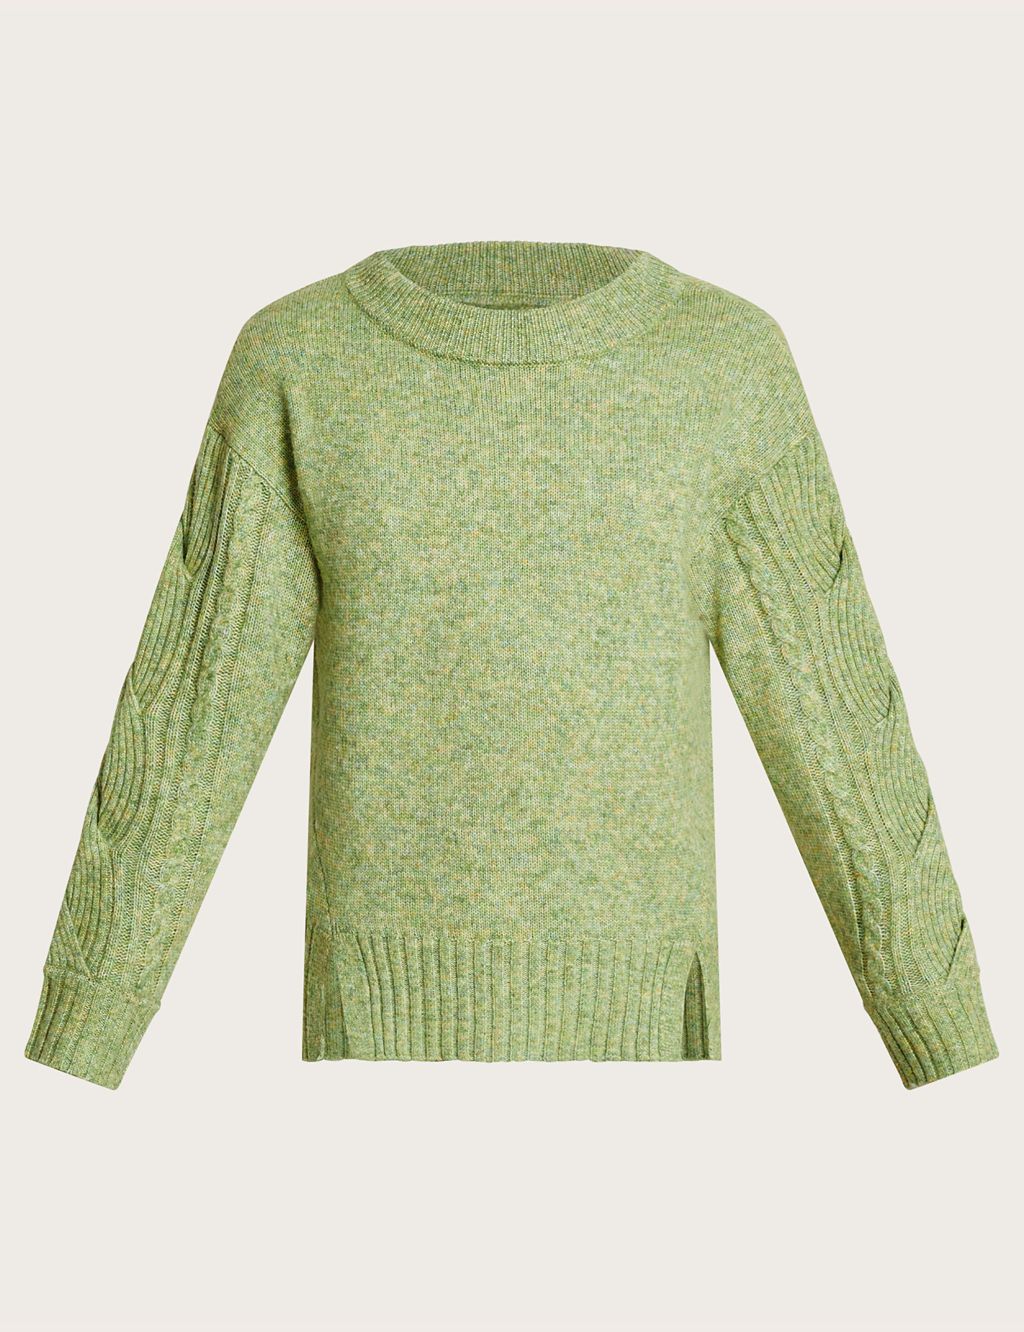 Recycled Blend Cable Knit Crew Neck Jumper image 2